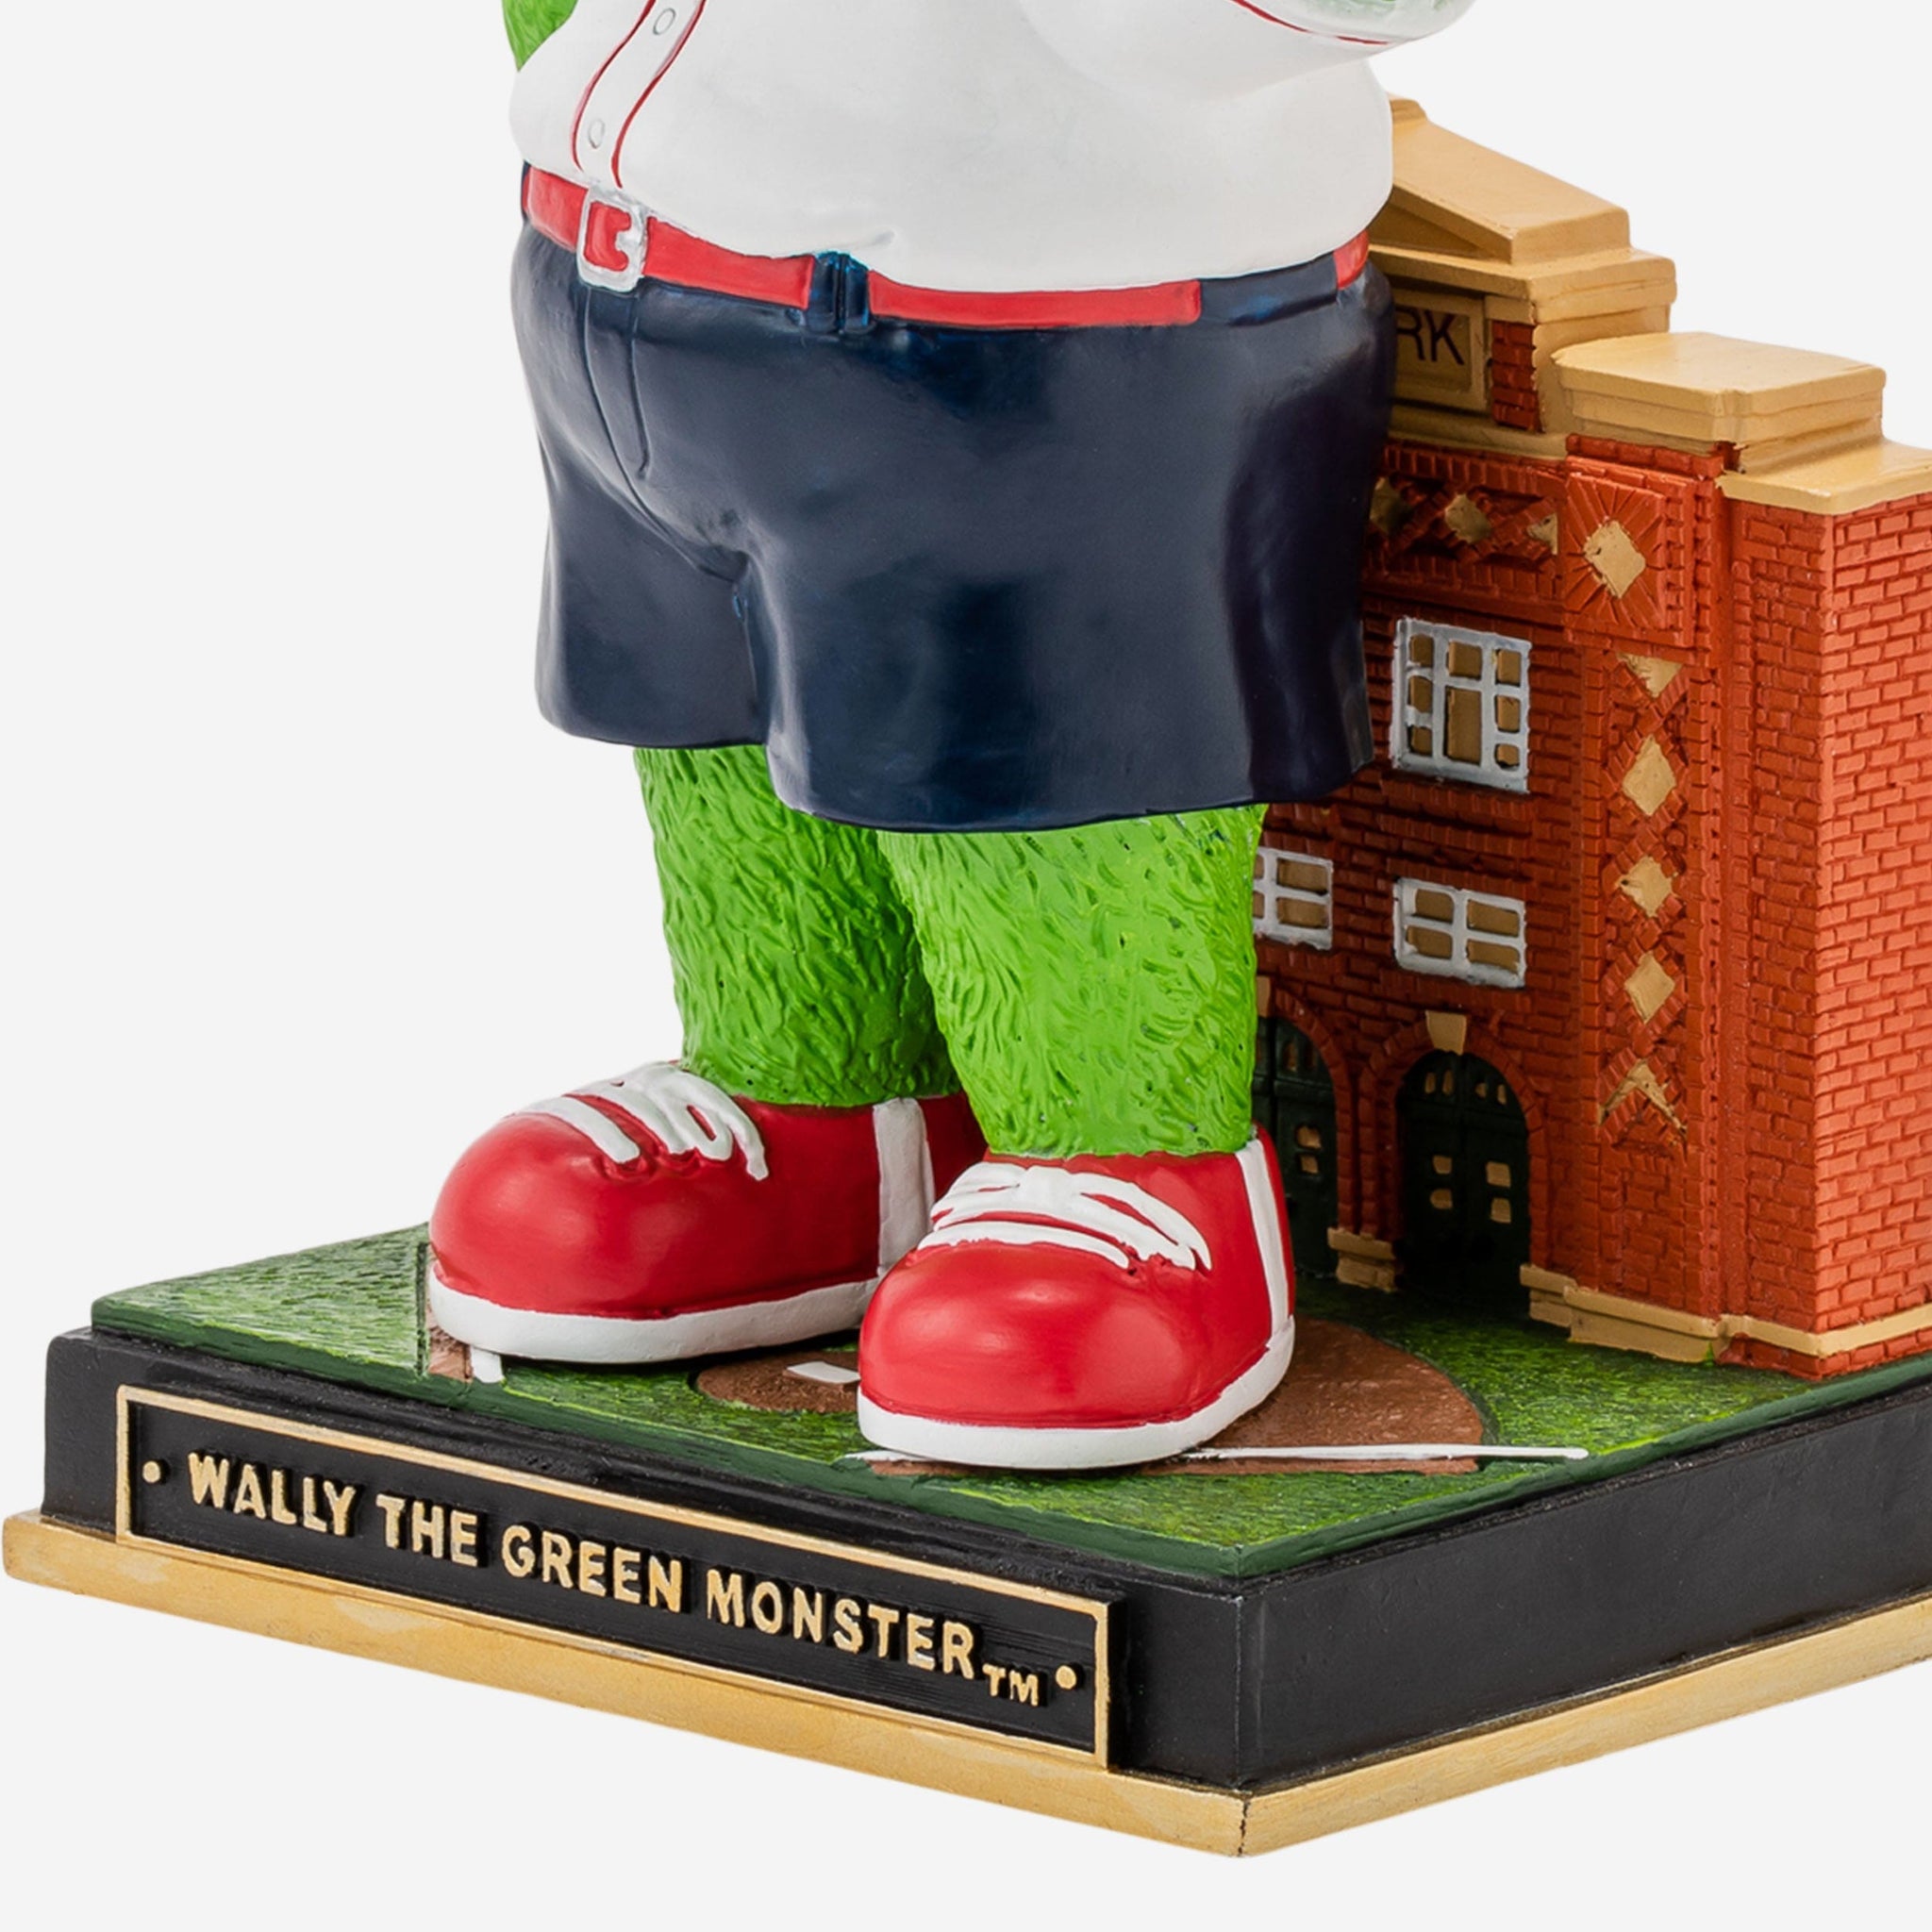 Wally the Green Monster Boston Red Sox Gate Series Mascot Bobblehead